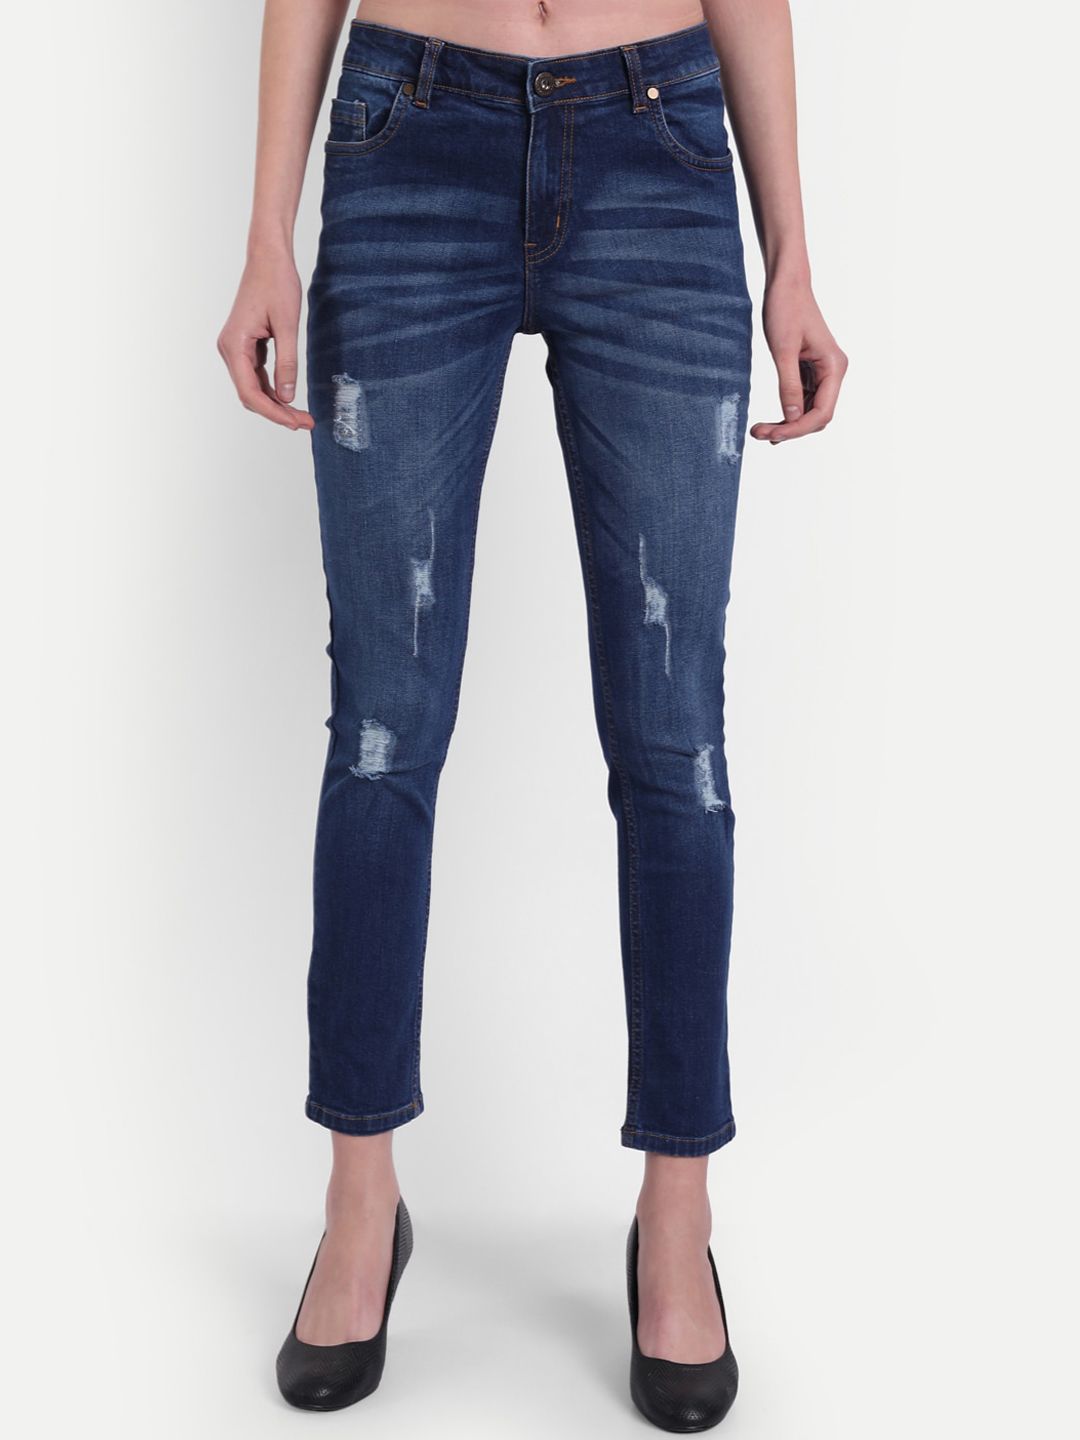 BROADSTAR Women Blue High-Rise Mildly Distressed Light Fade Stretchable Jeans Price in India